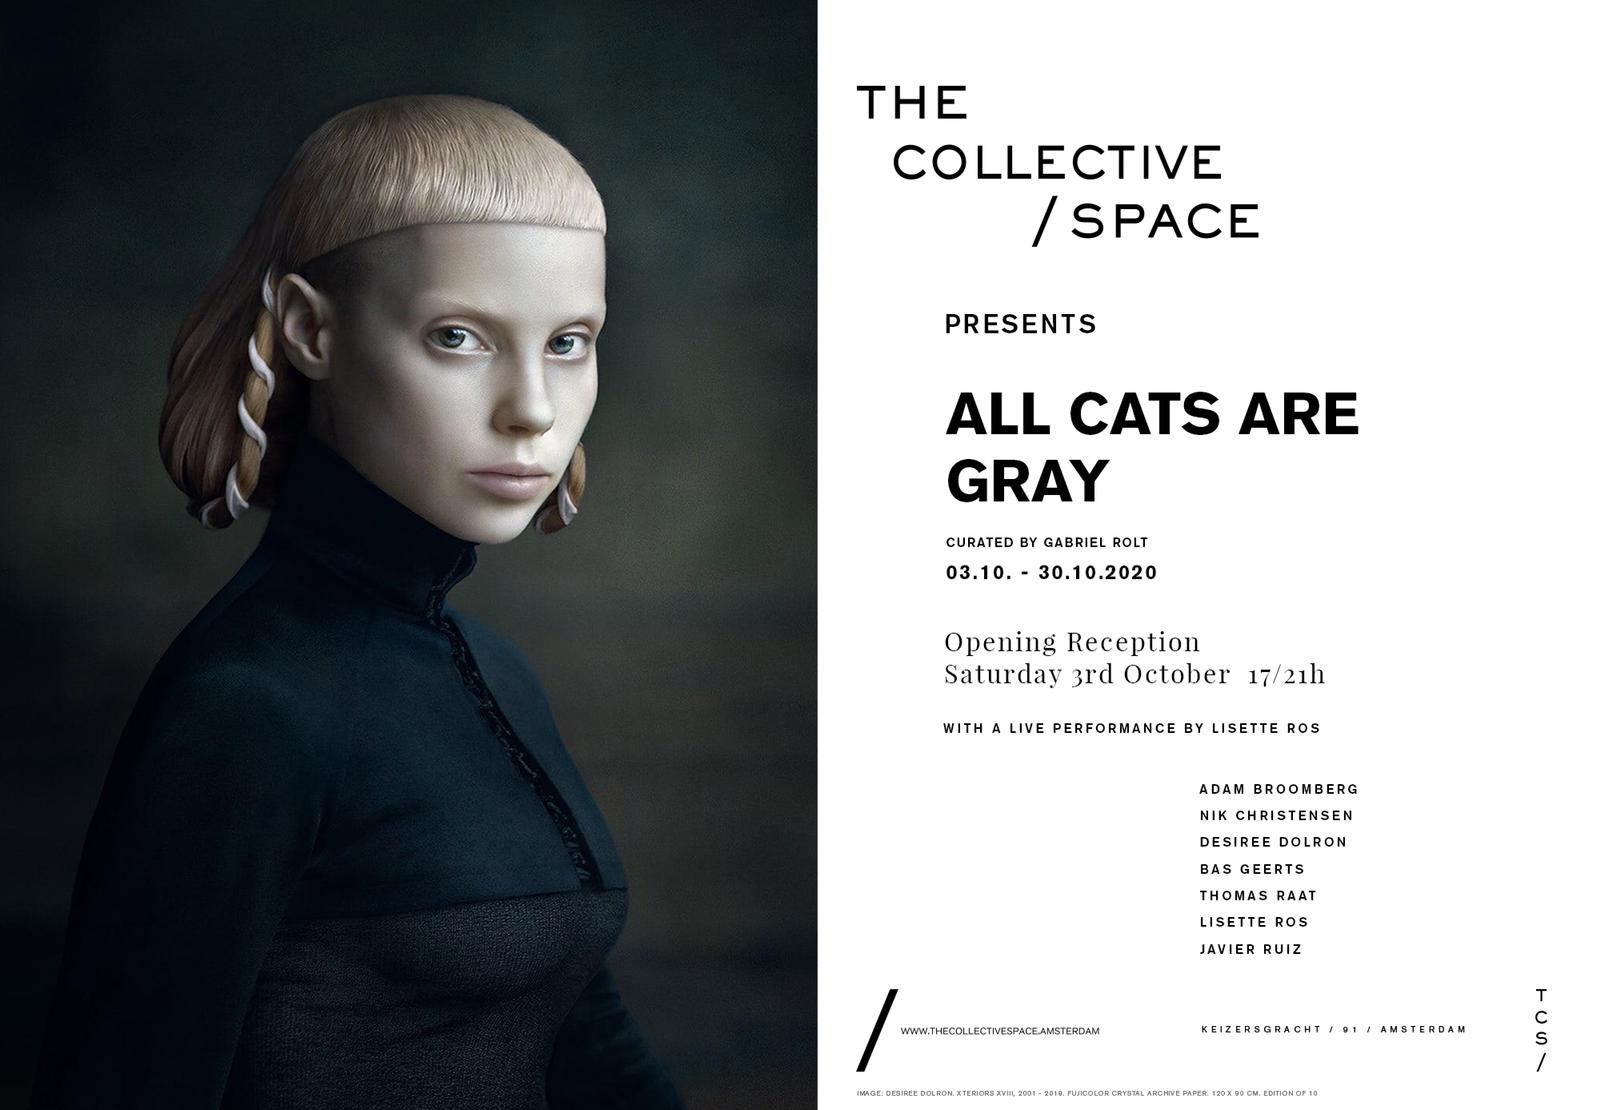 All Cats are Grey